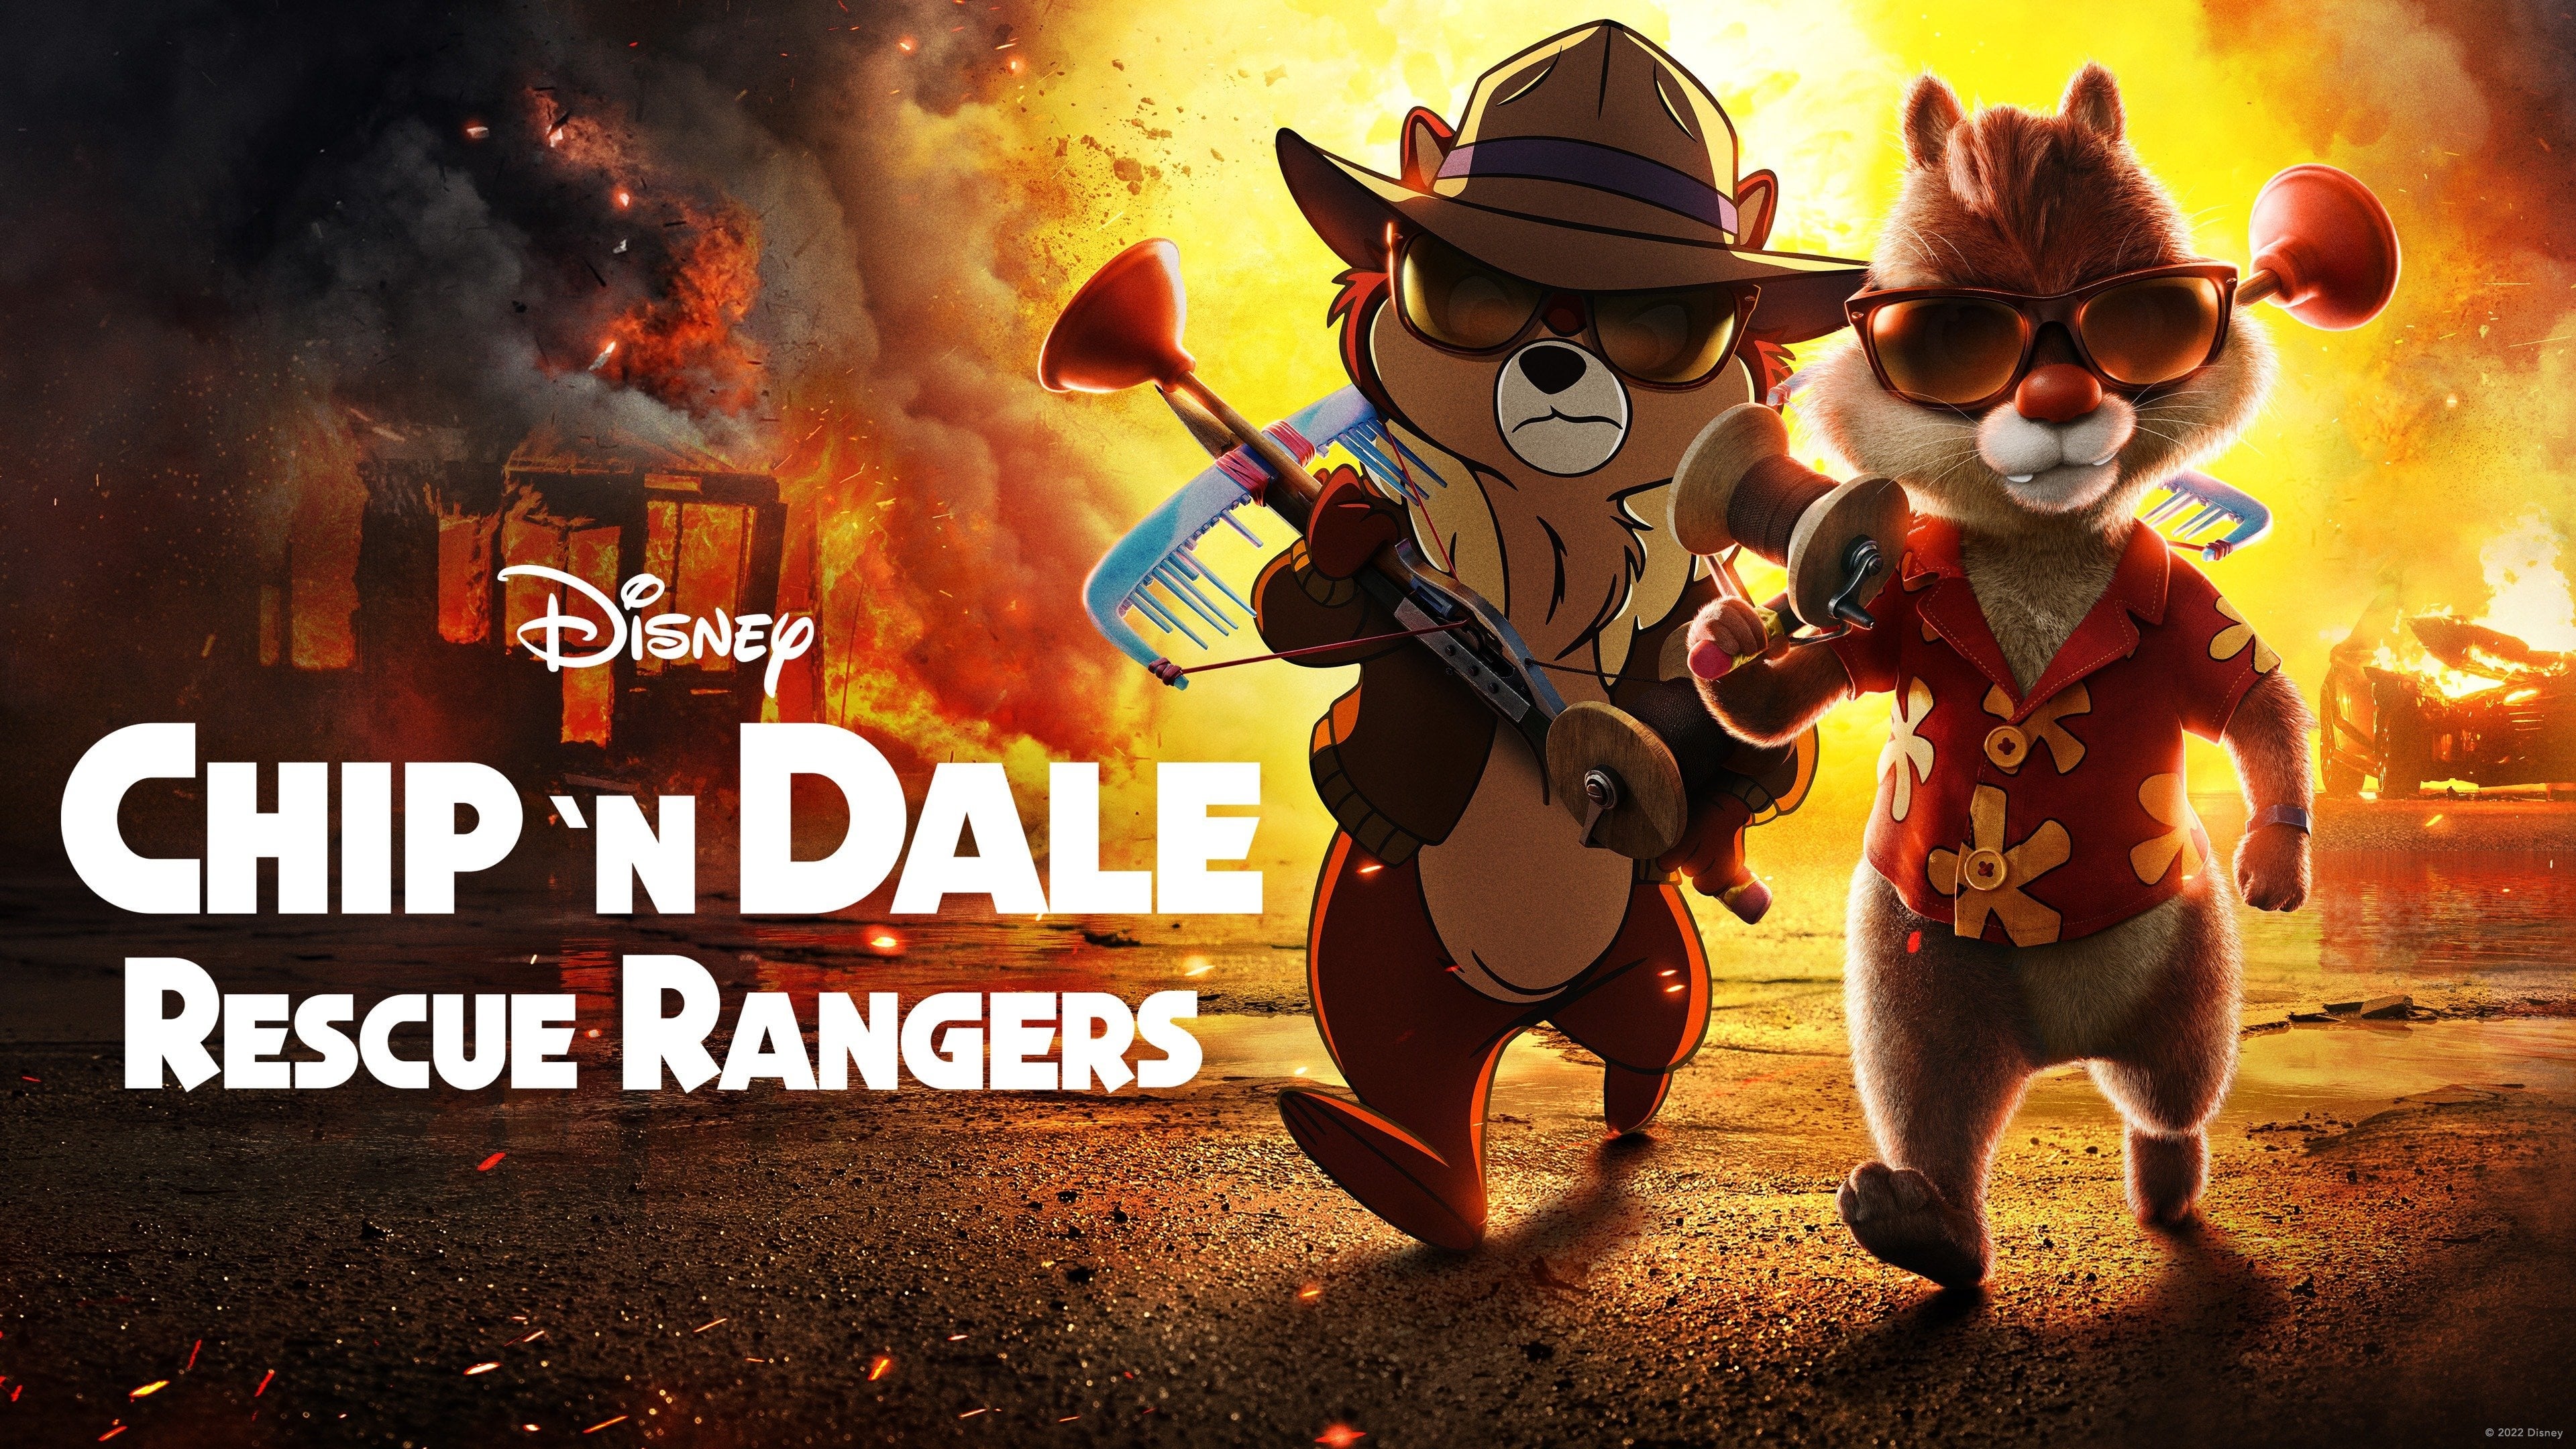 Movie Chip 'n Dale: Rescue Rangers HD Wallpaper | Background Image